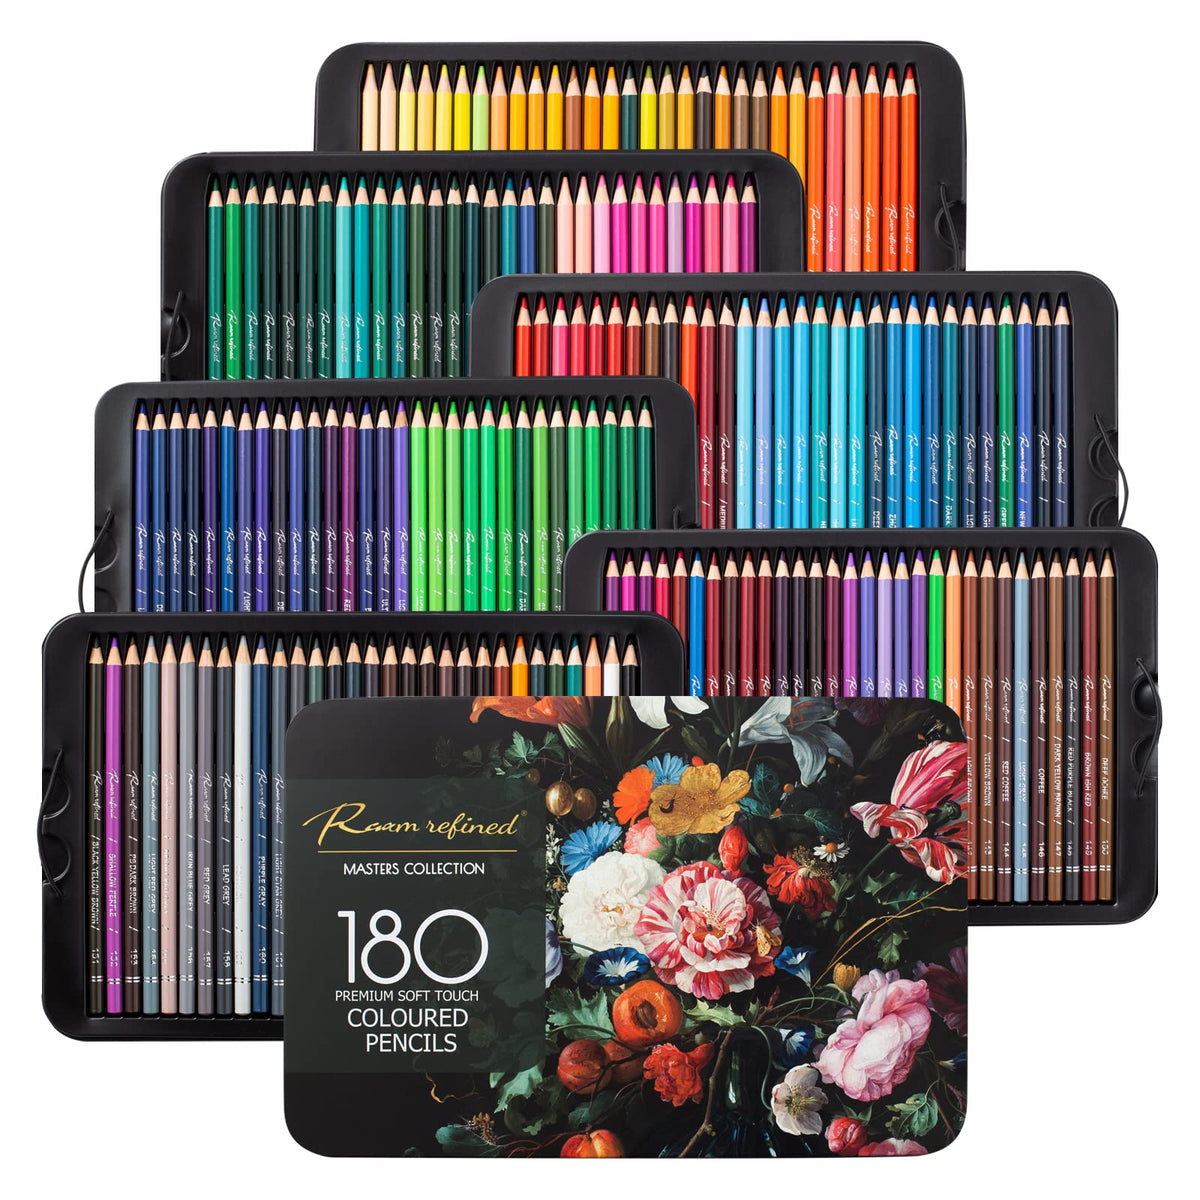 H & B 180 Colored Pencils for Adult Coloring, Soft Core Coloring